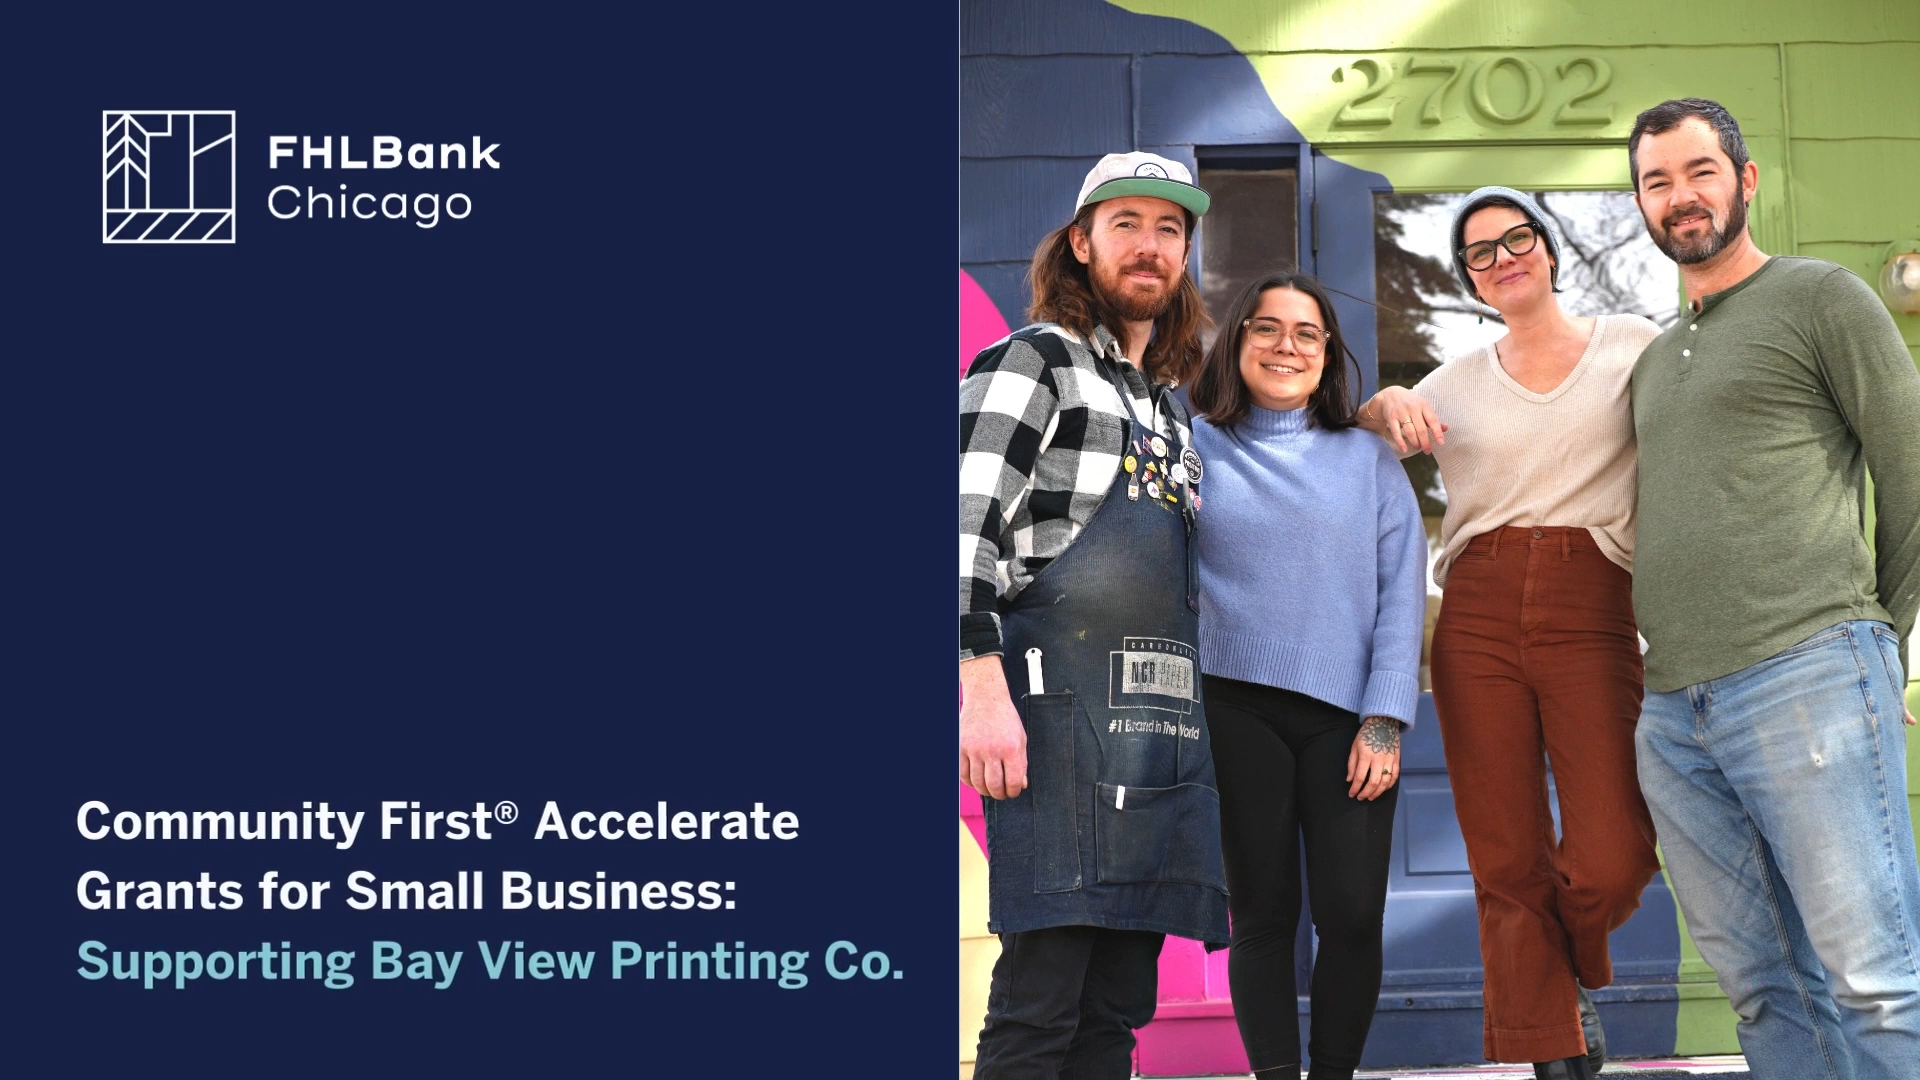 Bay View Printing Co. in Milwaukee received a $25,000 Community First Accelerate Grant for Small Business from FHLBank Chicago in 2023, in partnership with First Federal Bank of Wisconsin. Watch how this historical, women-owned business plans to use the grant to modernize and scale their operations.